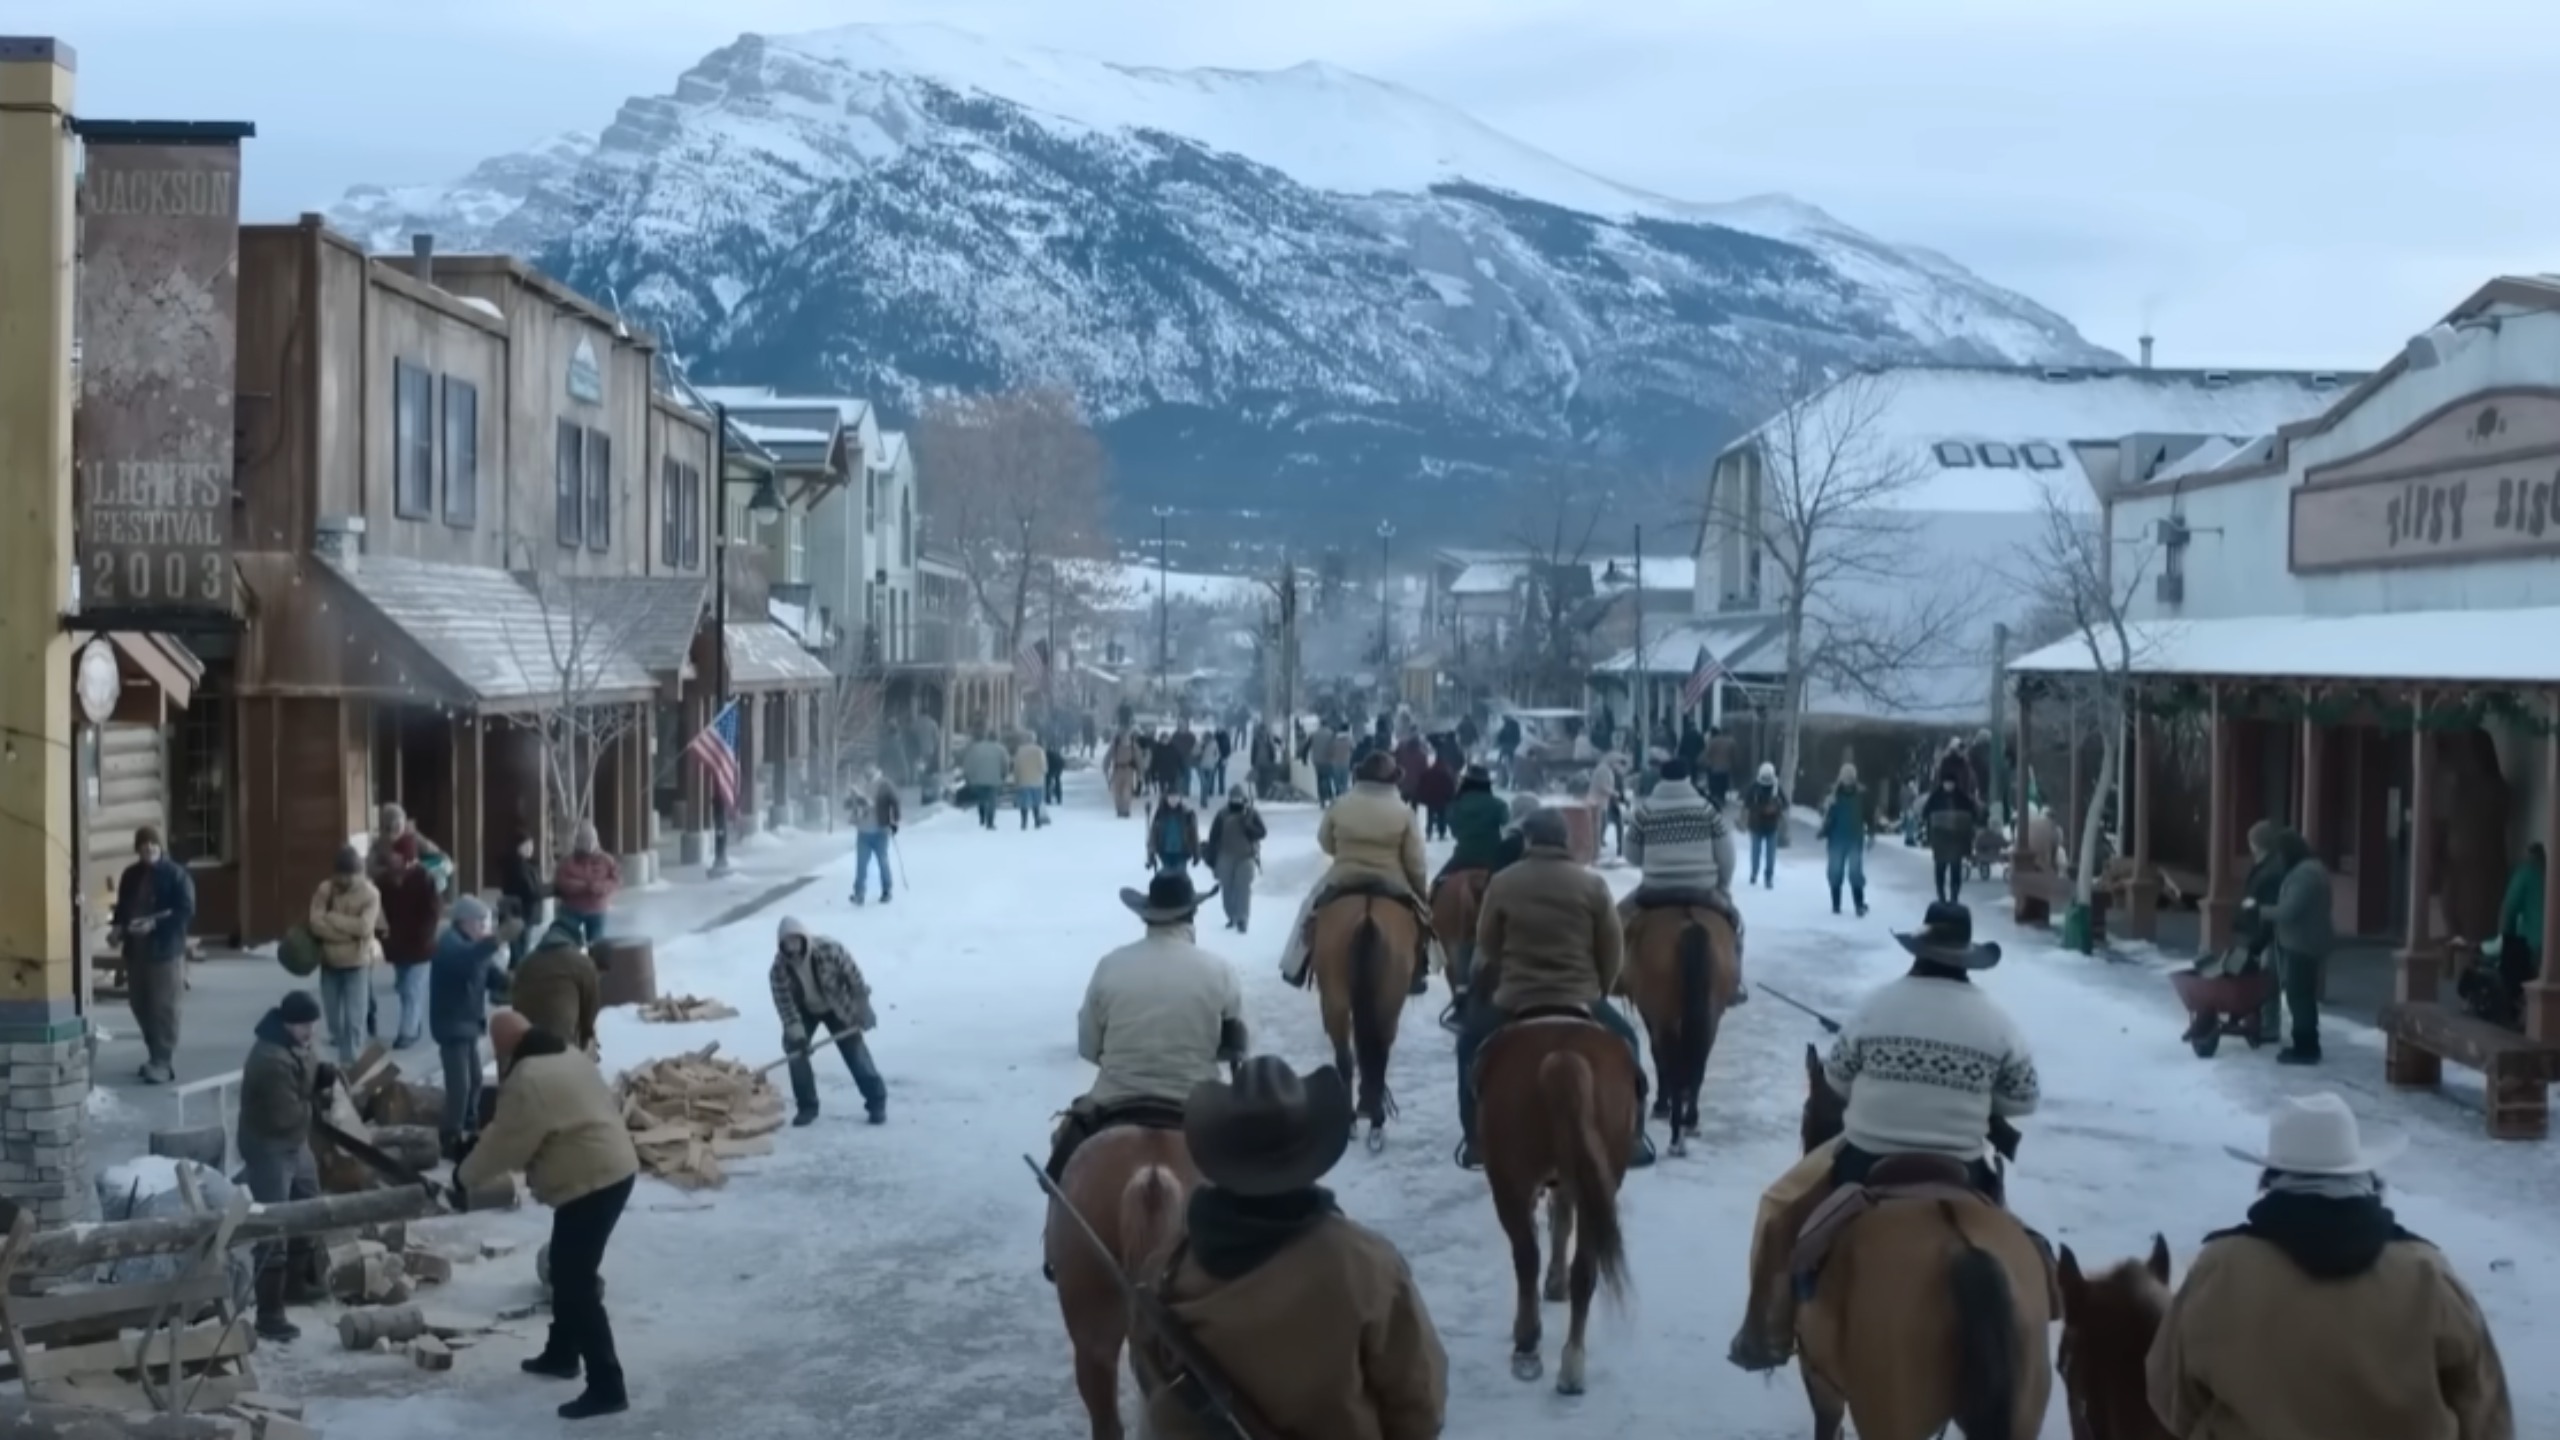 Here's The Alberta Filming Locations For Episode 6 Of 'The Last Of